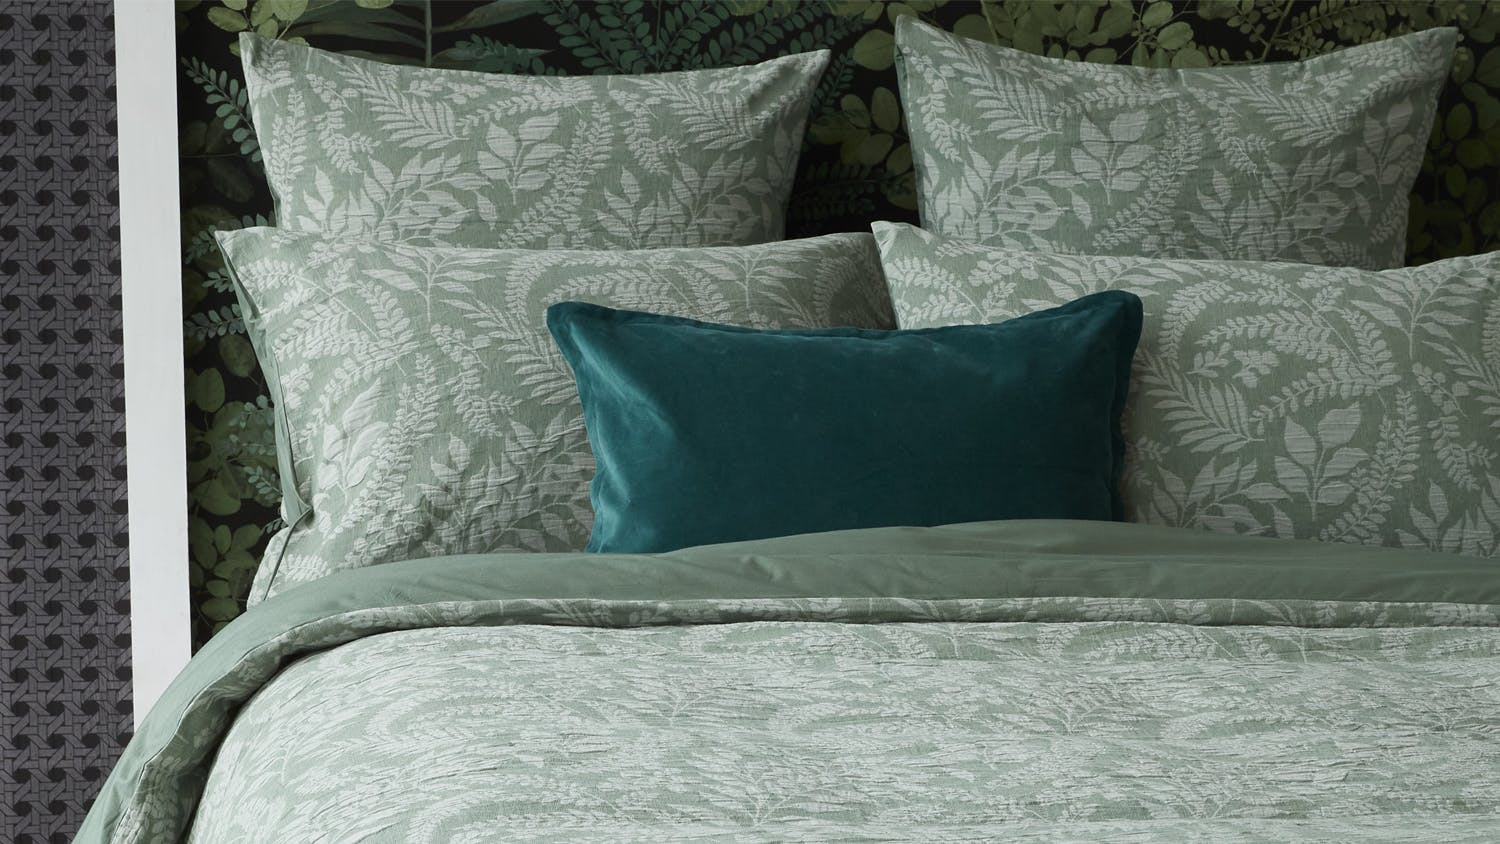 Willow Fern Duvet Cover Set by Luxotic